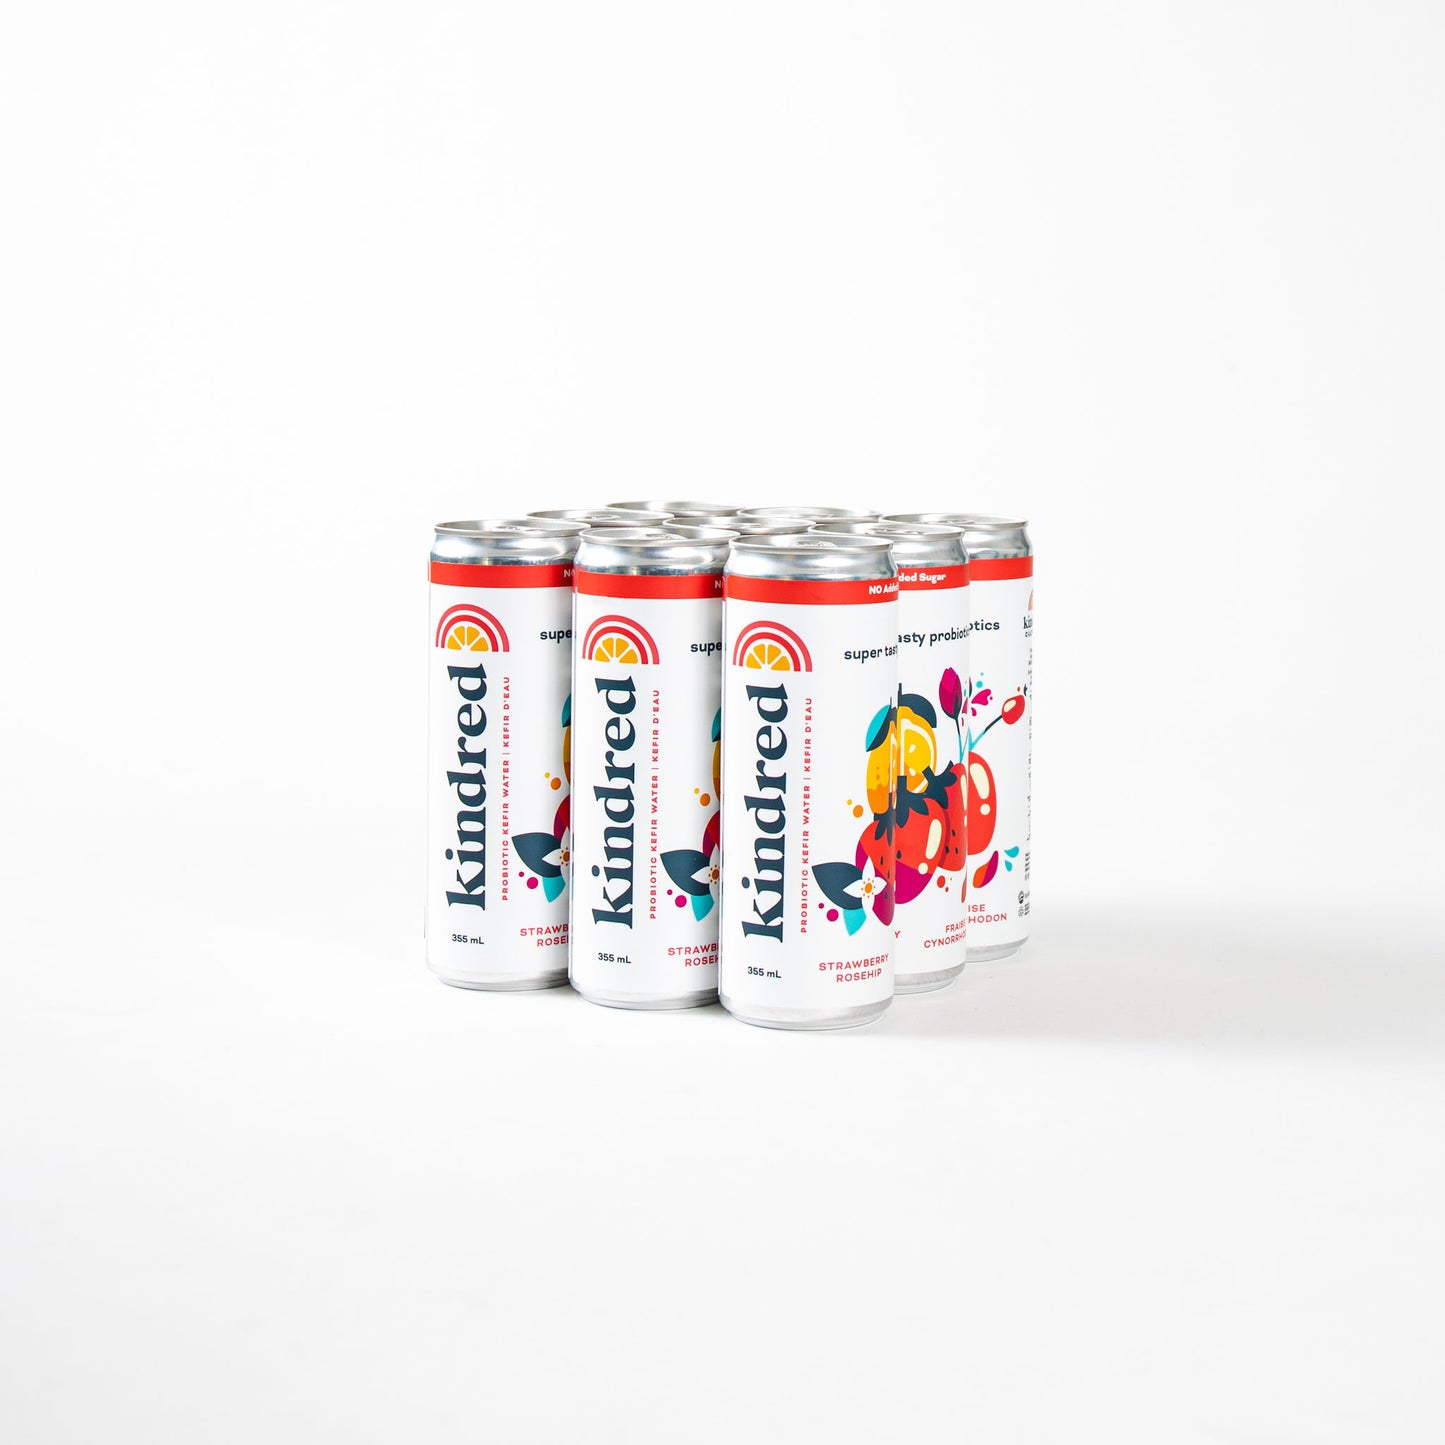 Kindred Cultures Strawberry Rosehip Kefir Water Cans